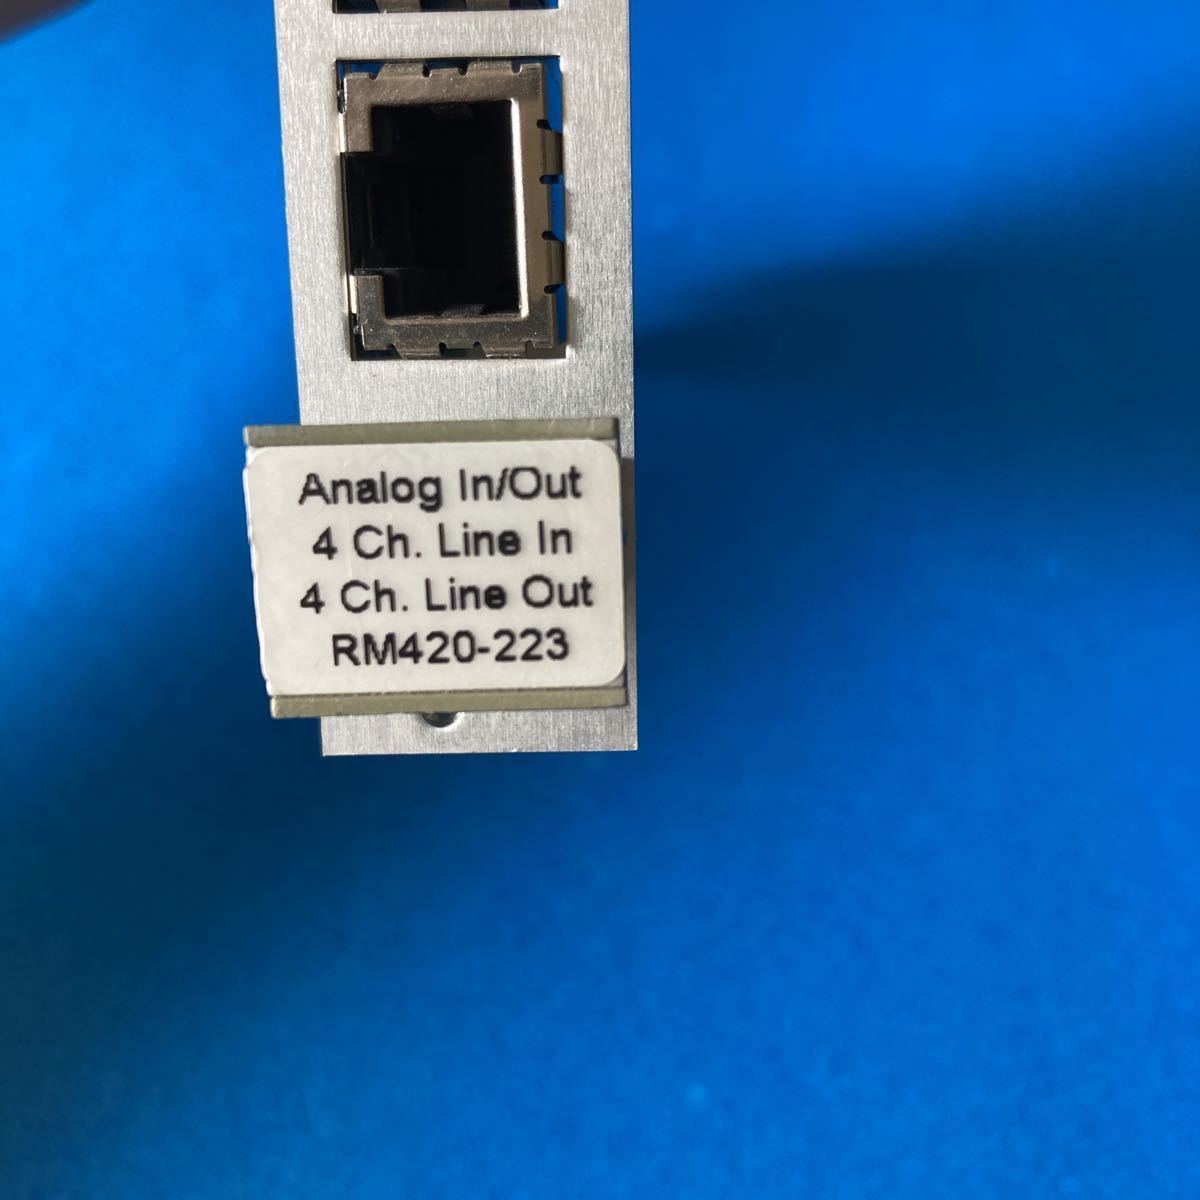 Analog In/Out /4 Ch. Line In / 4 Ch. Line Out /RM420-223/52048-301 FCI L1408(76)